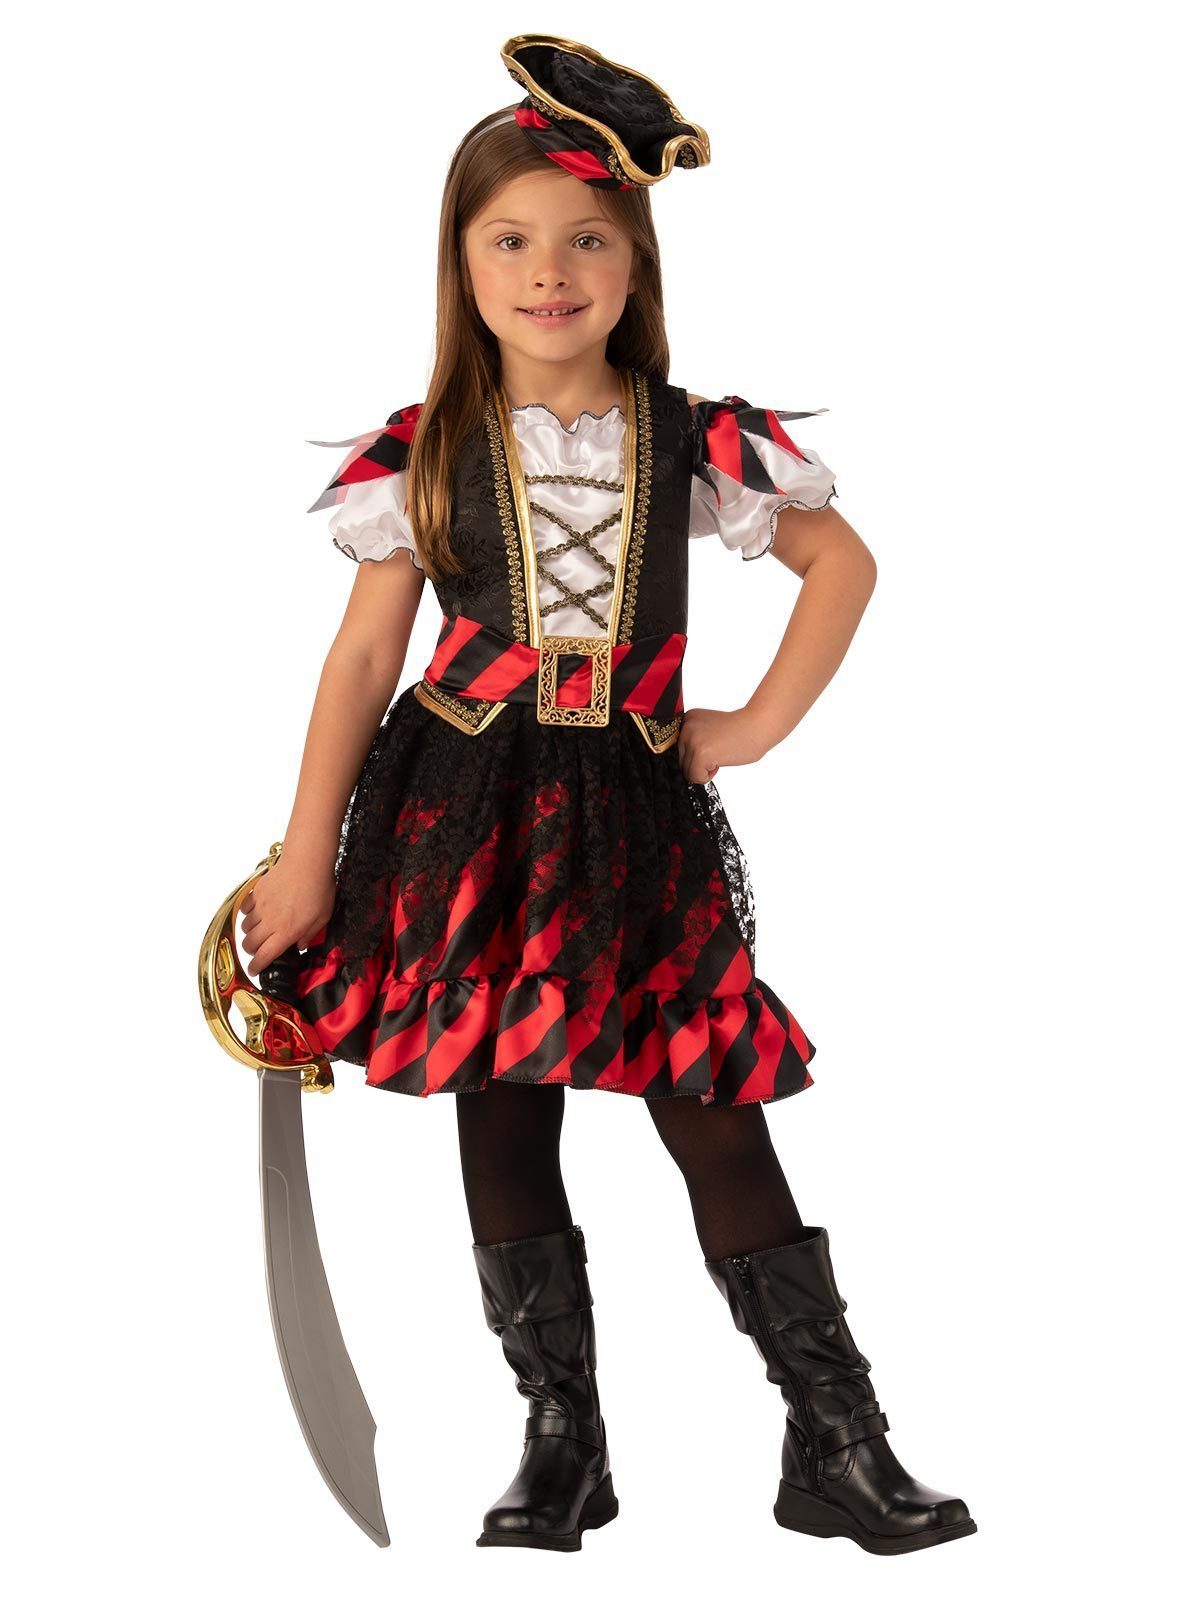 12 Best Pirate Costumes for Kids & Adults in 2018 - Pirate Halloween  Costumes